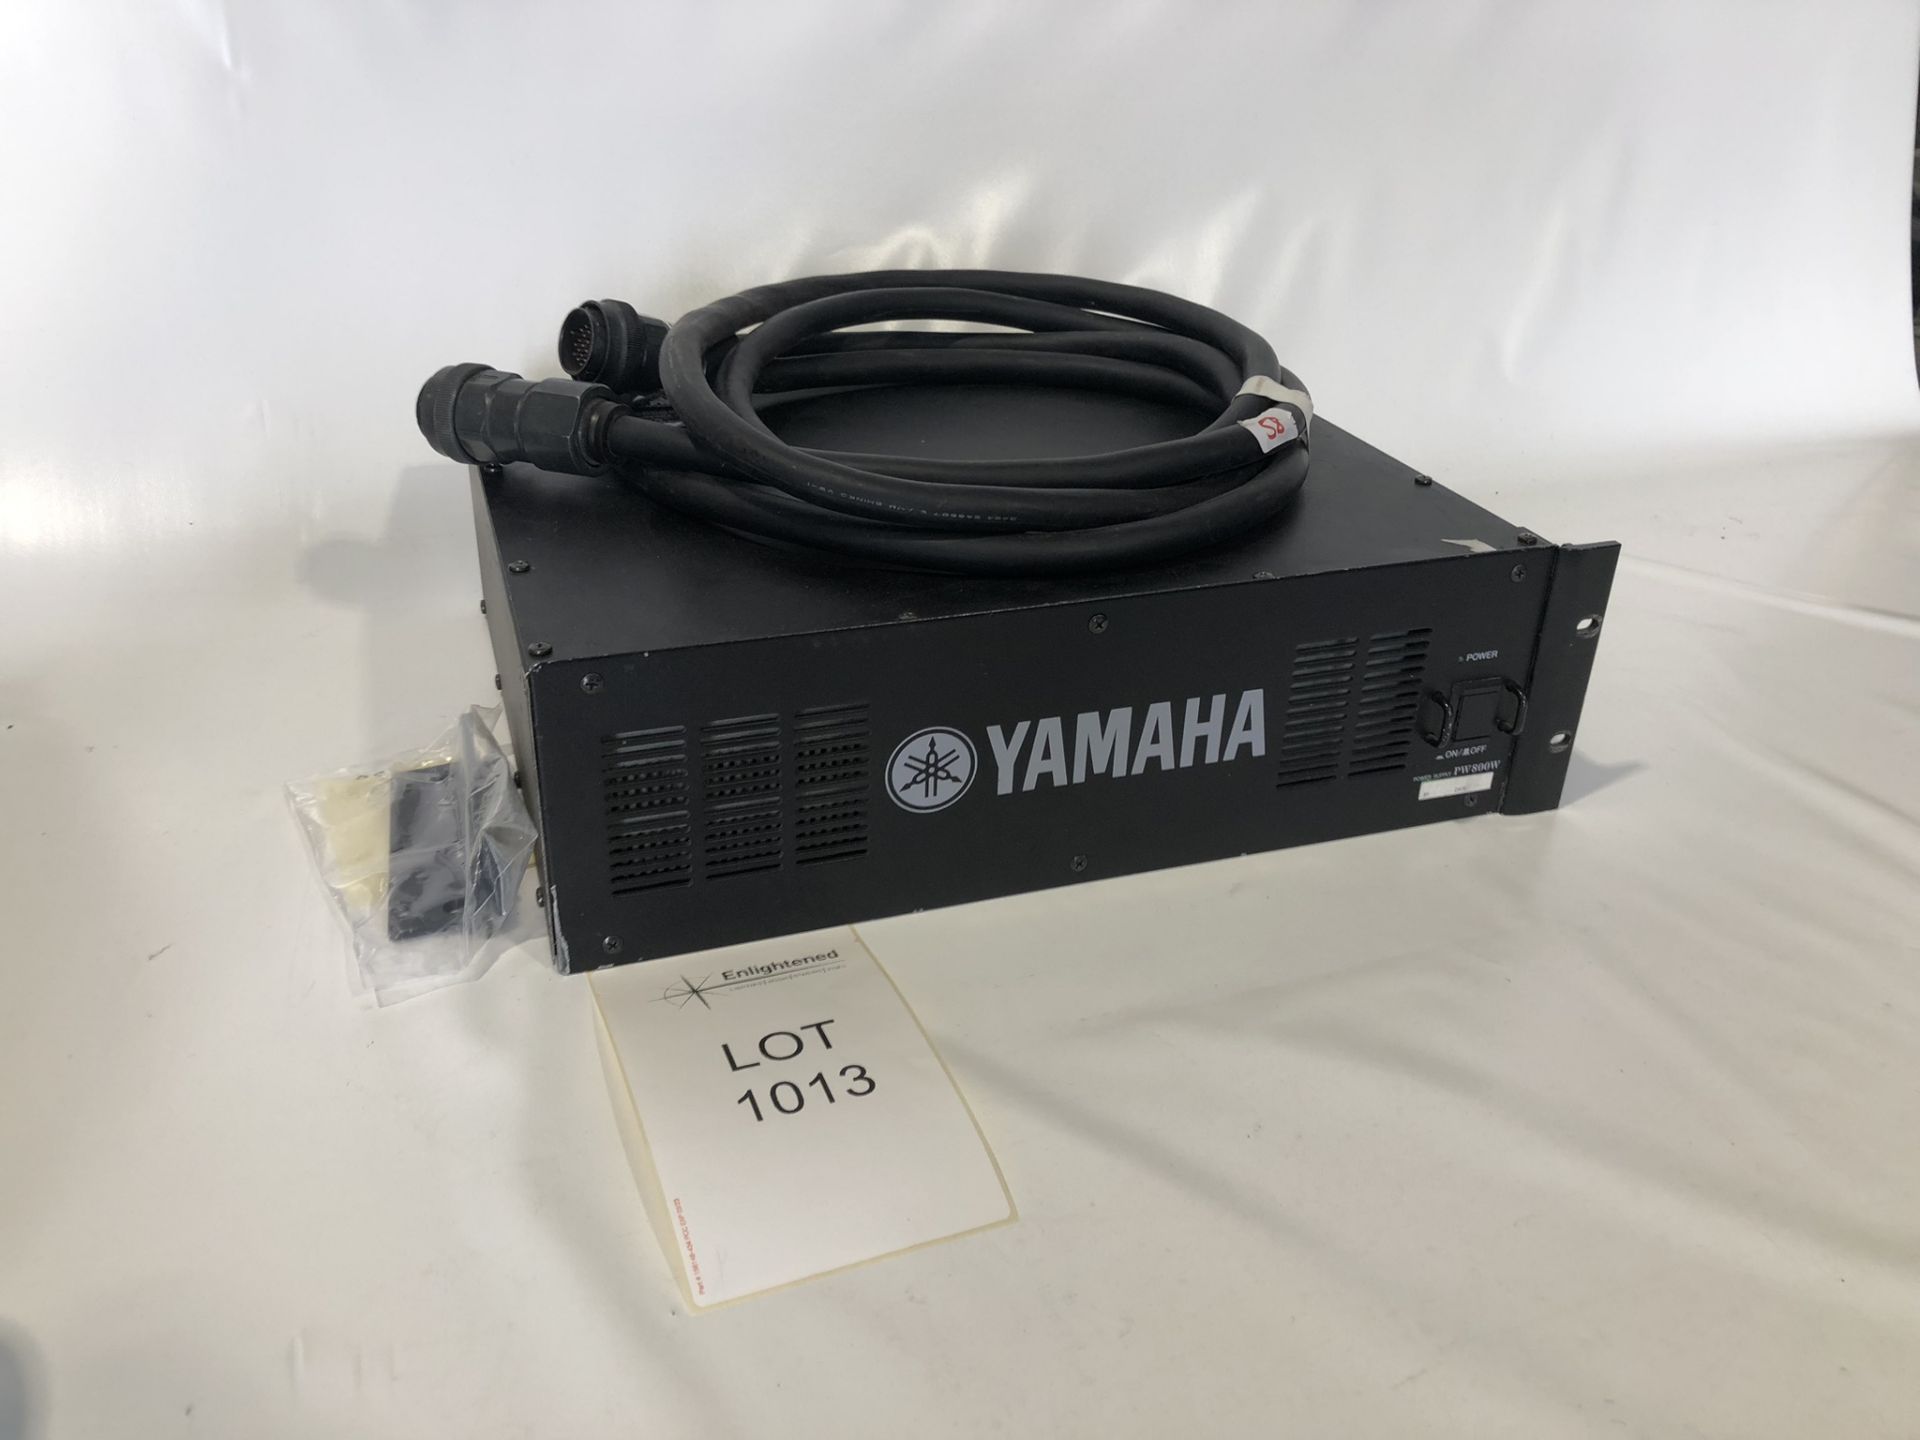 SPARES/REPAIRS Yamaha PW880W power supply Condition: Spares/Repairs Unit not working, repair may